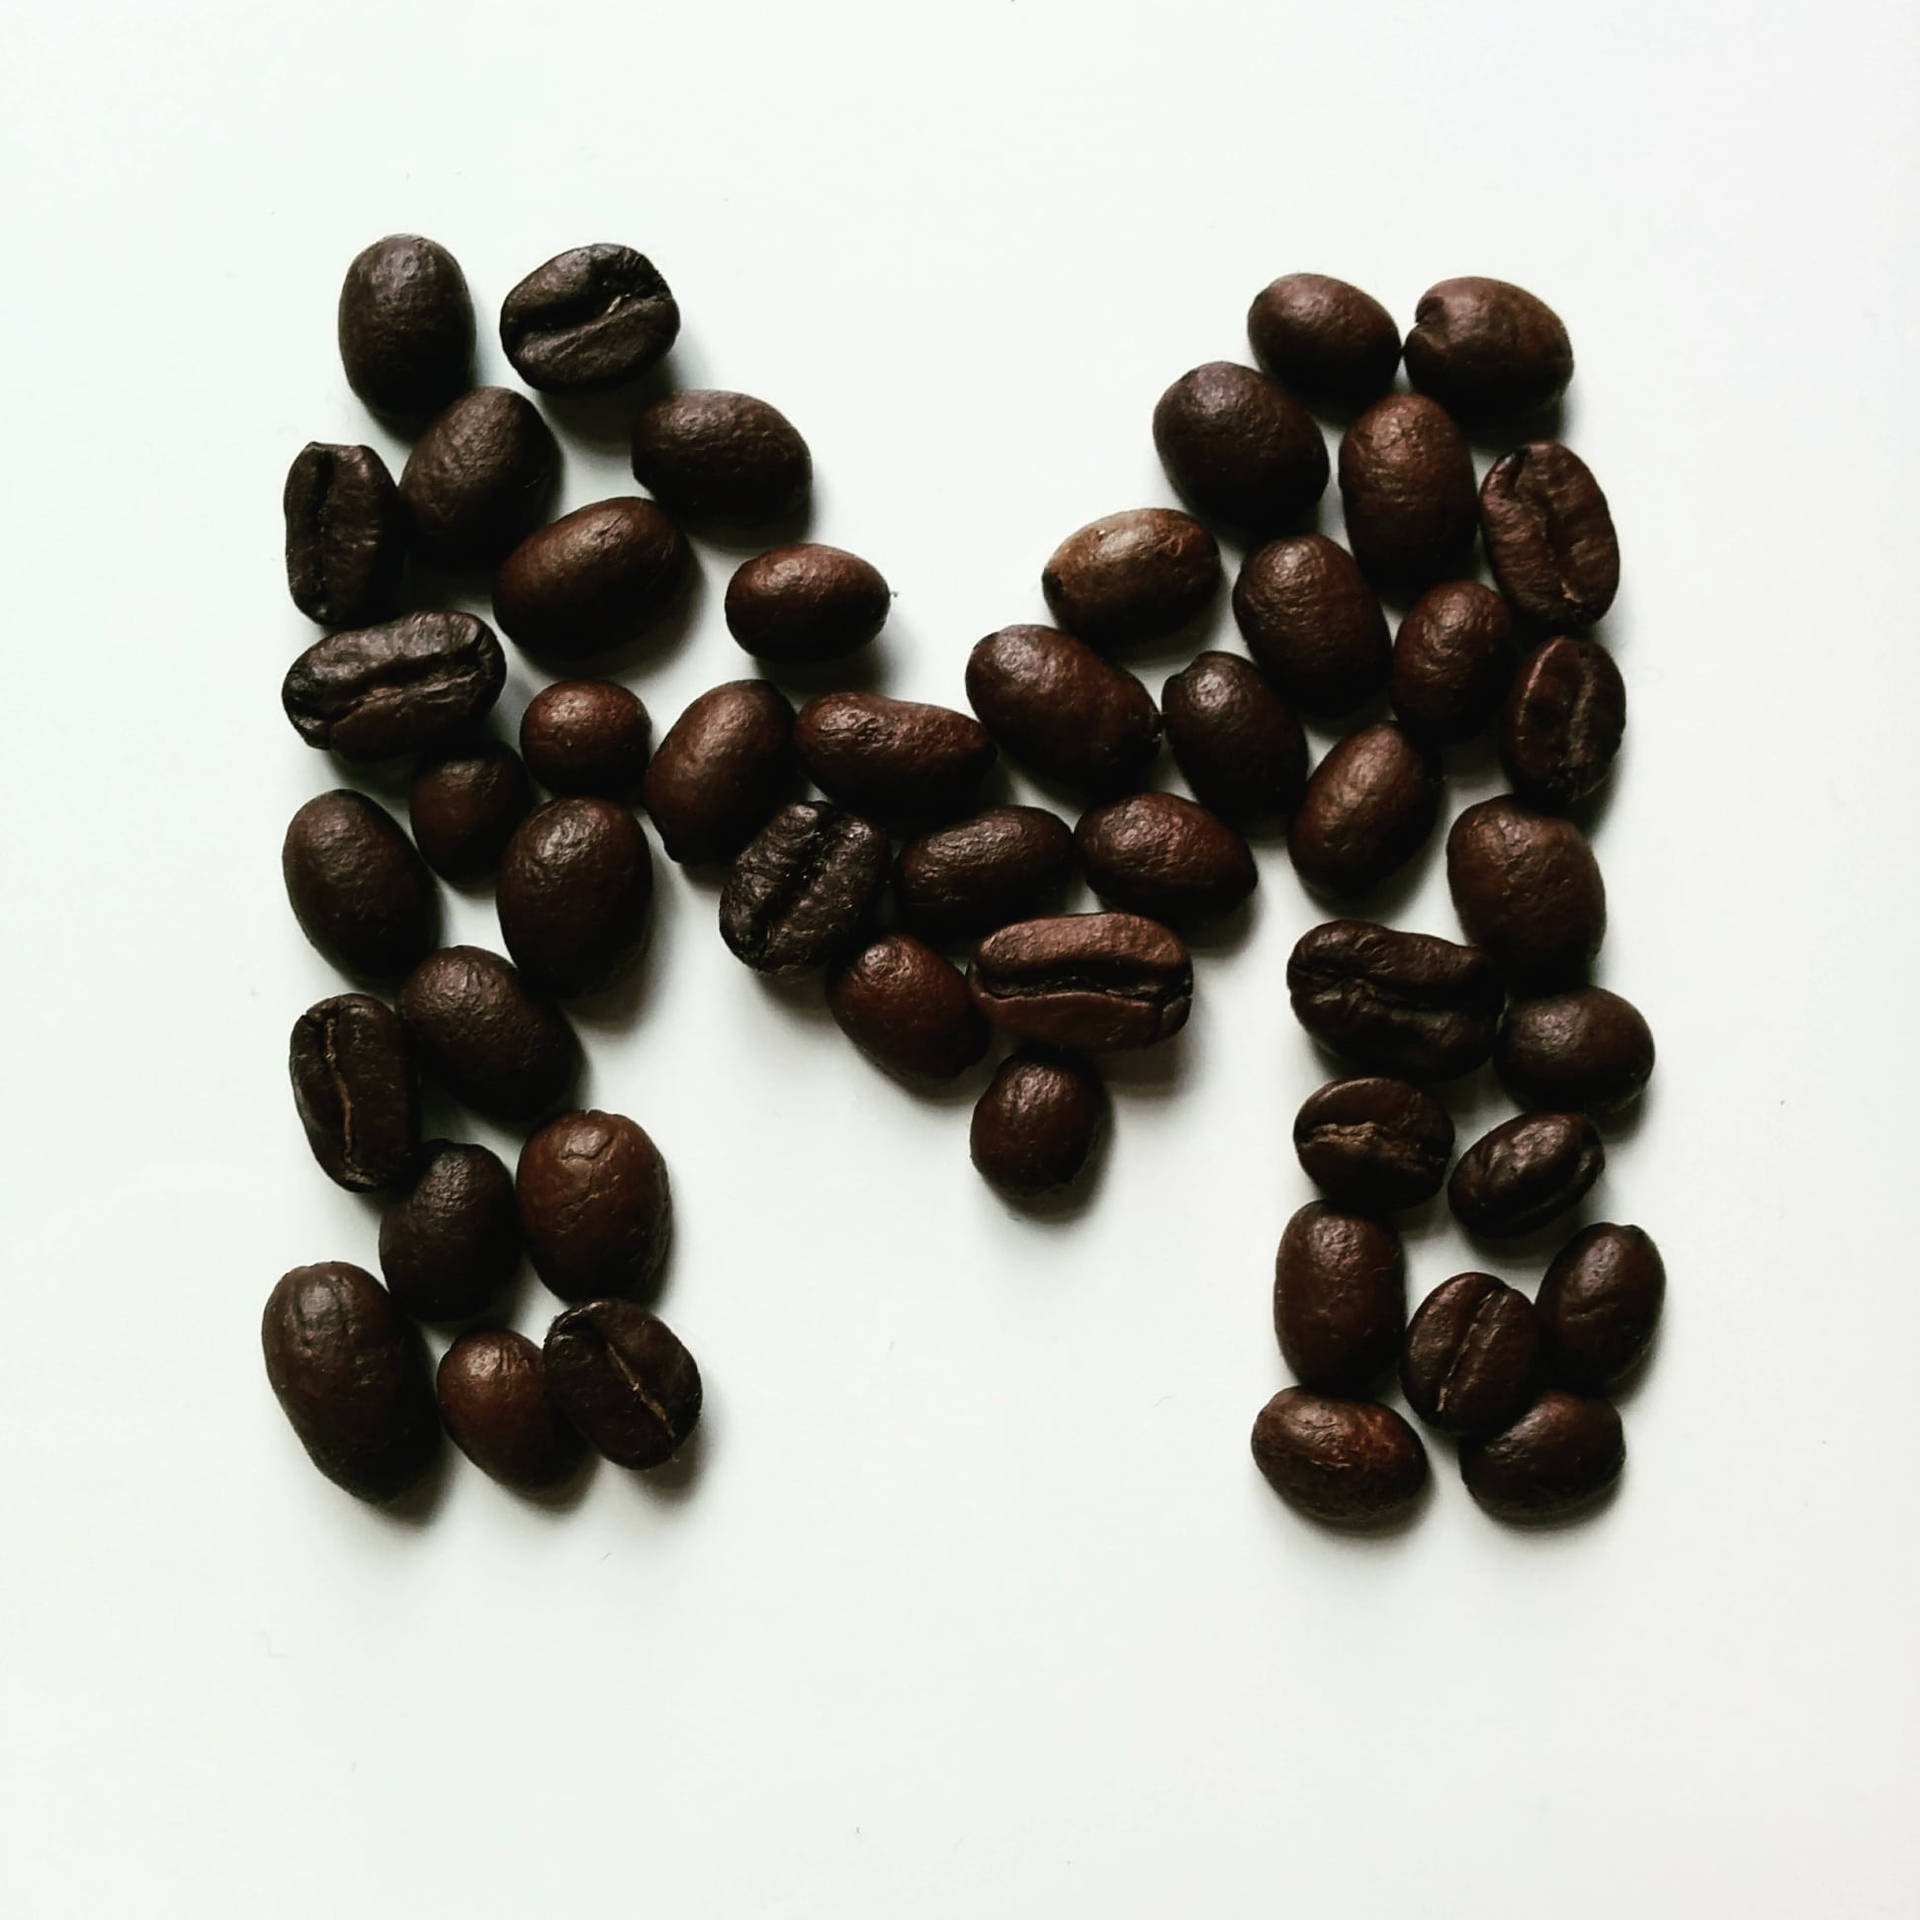 Letter M formed with Coffee Beans Wallpaper